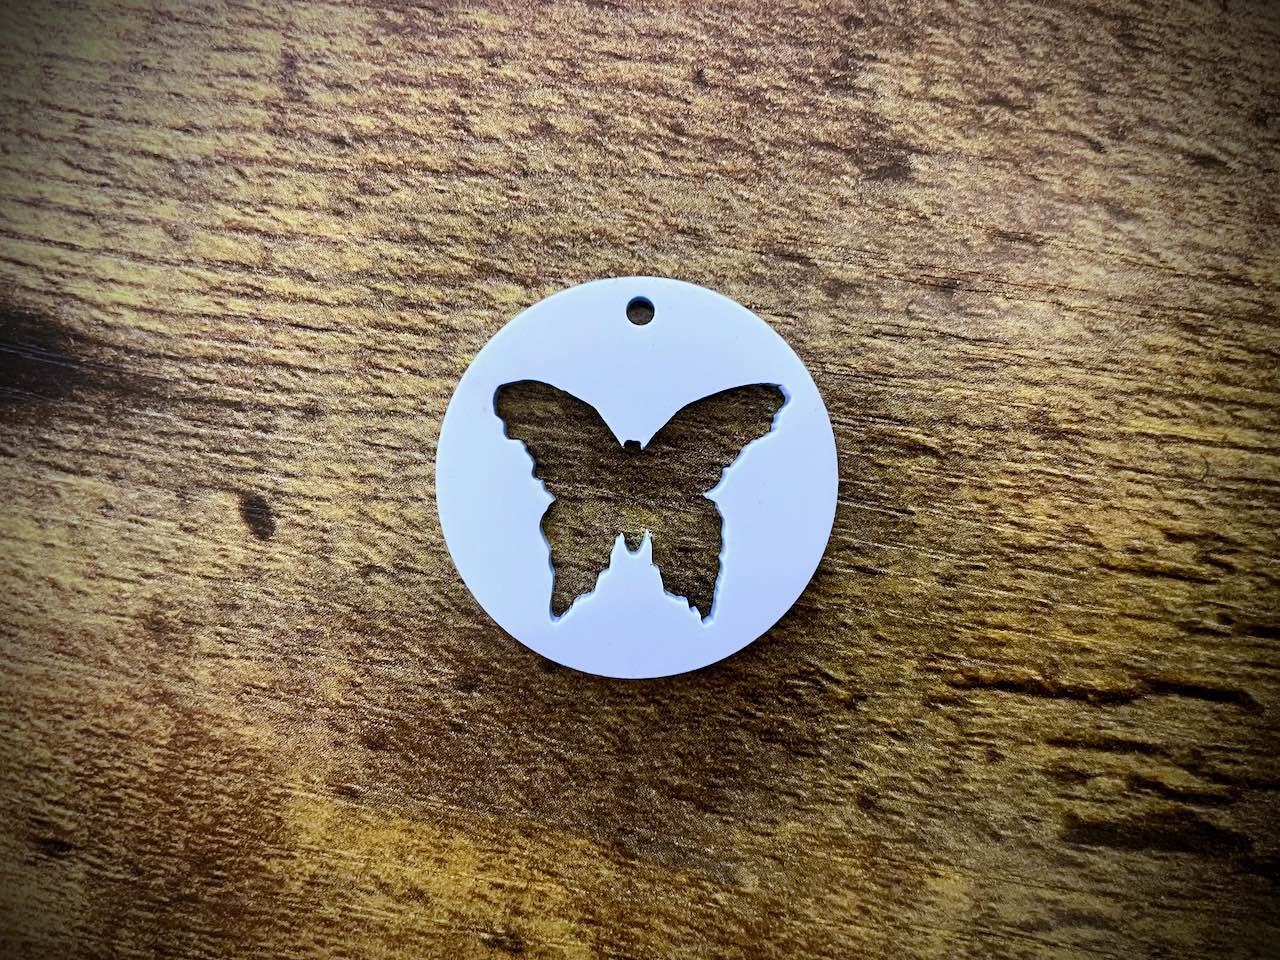 Allegory Gallery Special Edition Springtime Acrylic Cut-Out Pendants—Butterfly